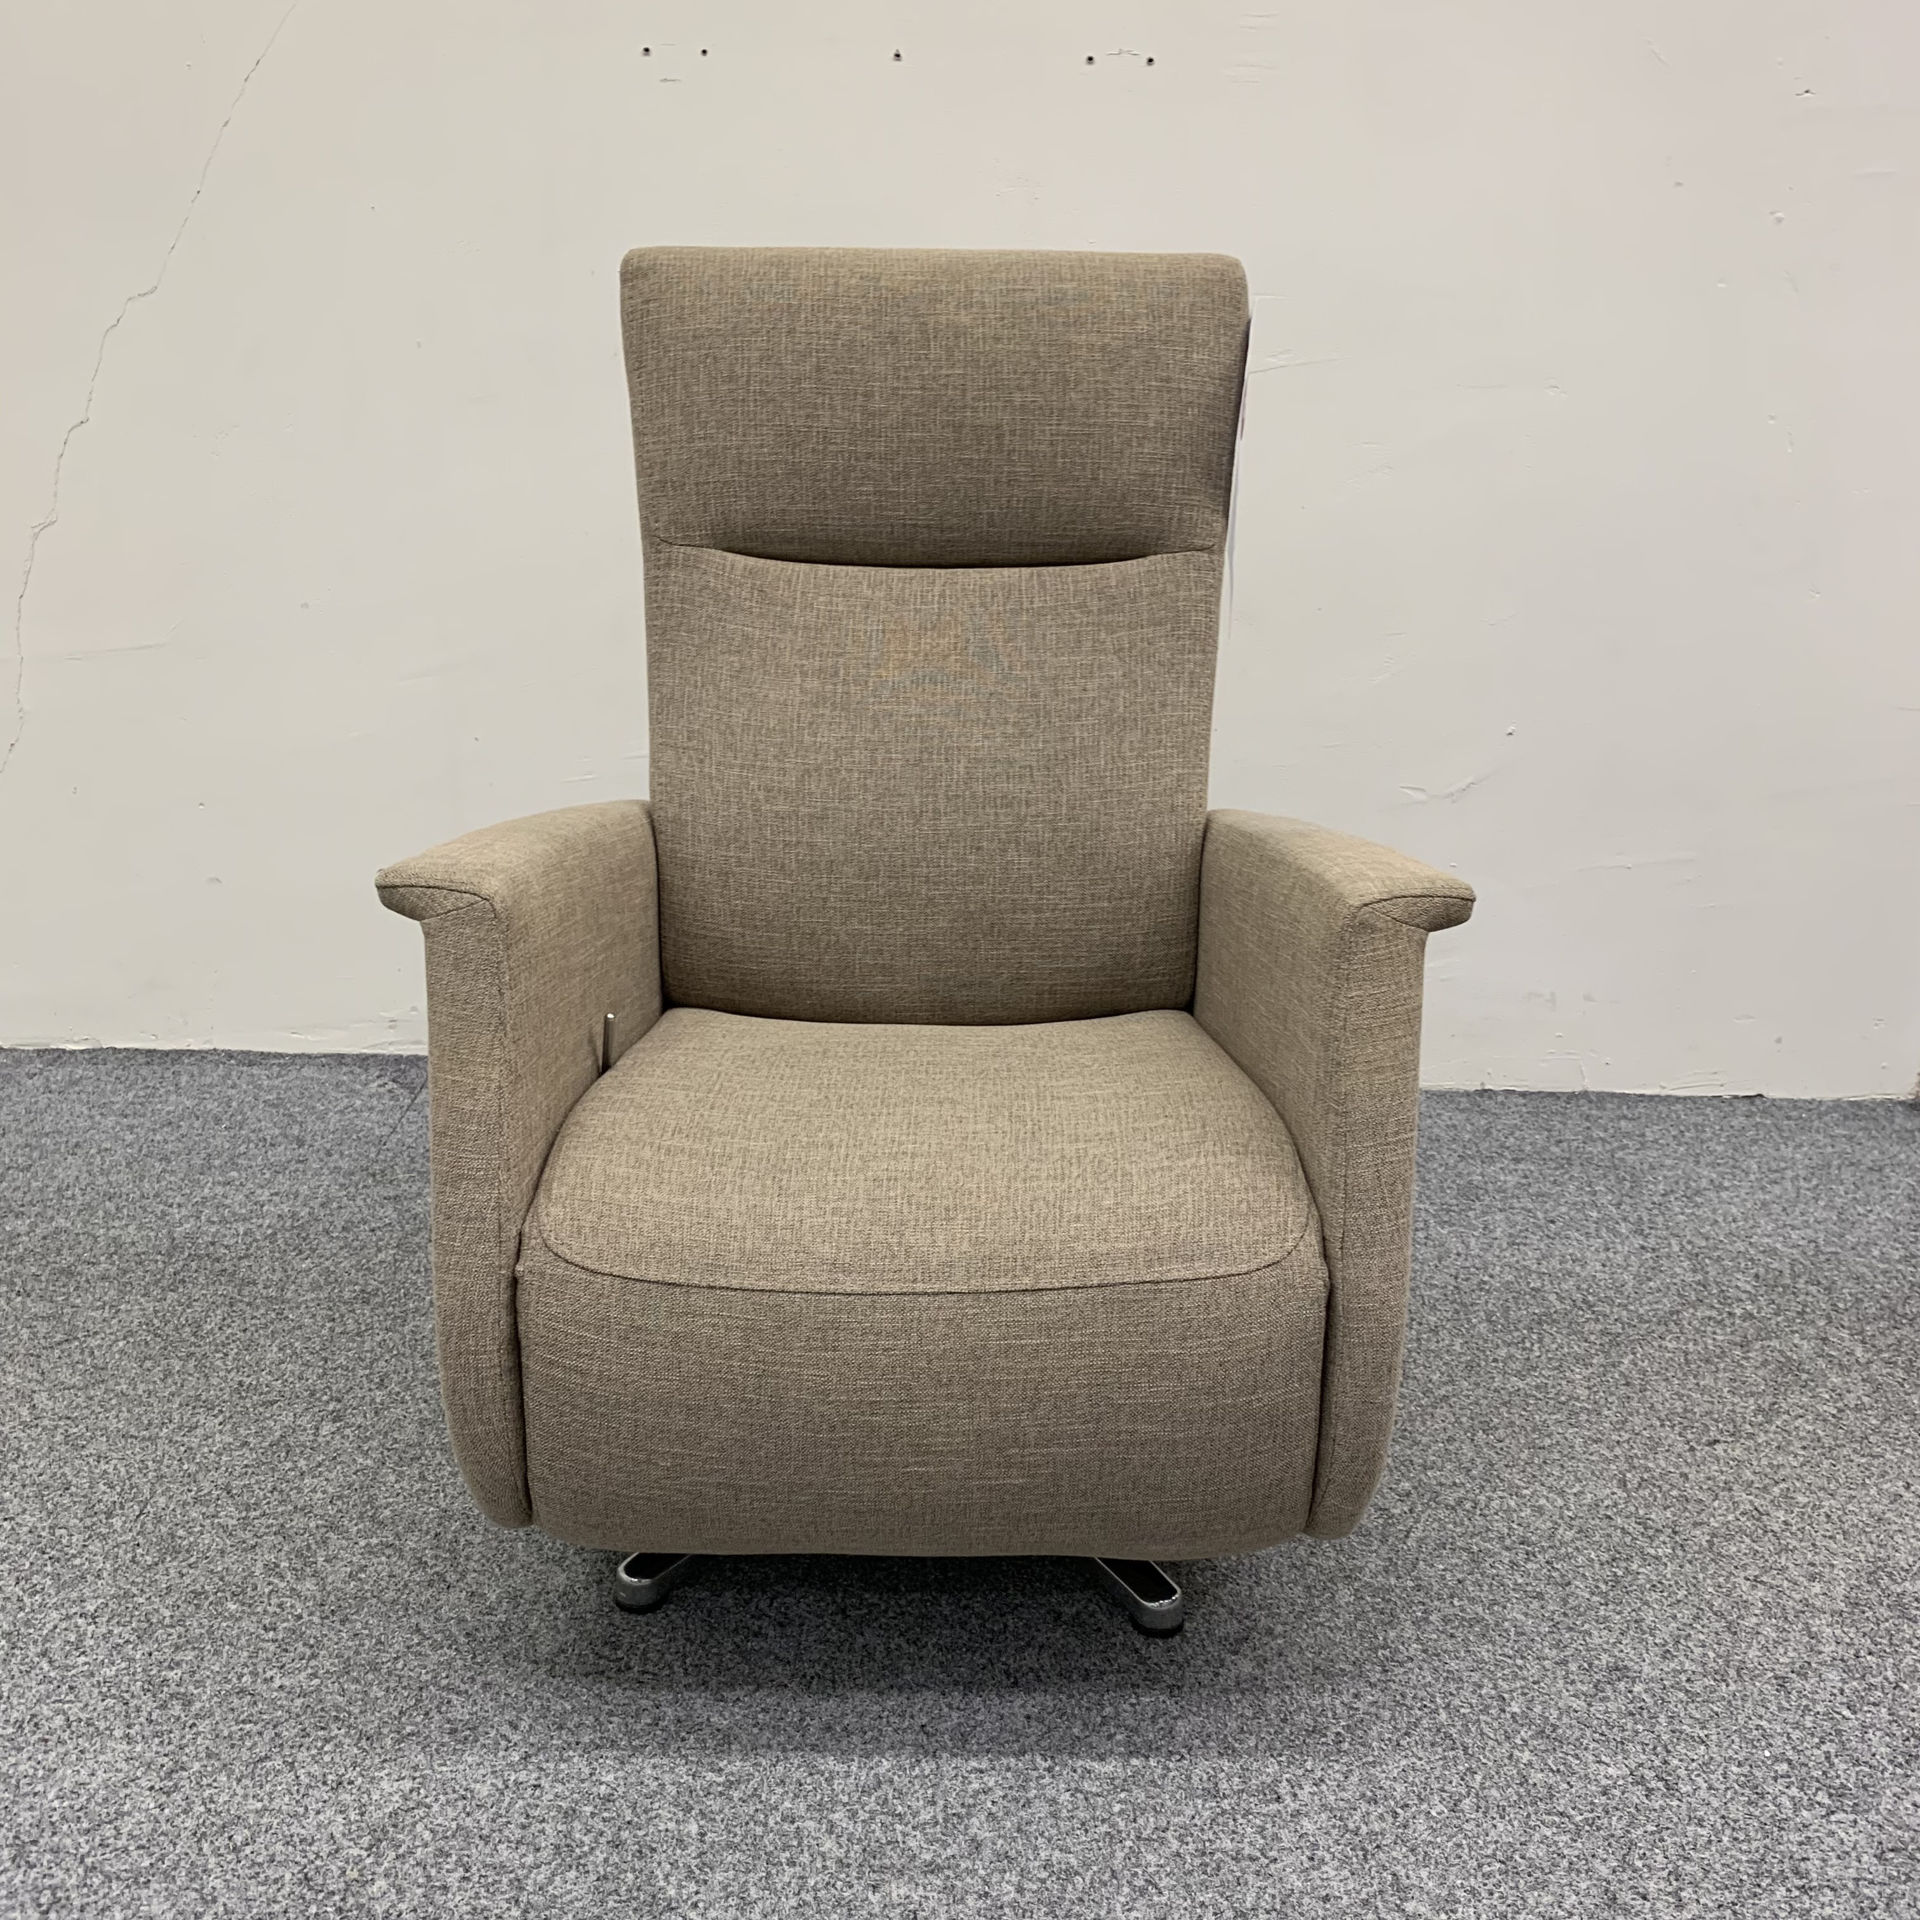 Prominent Toscana Draai S relaxfauteuil